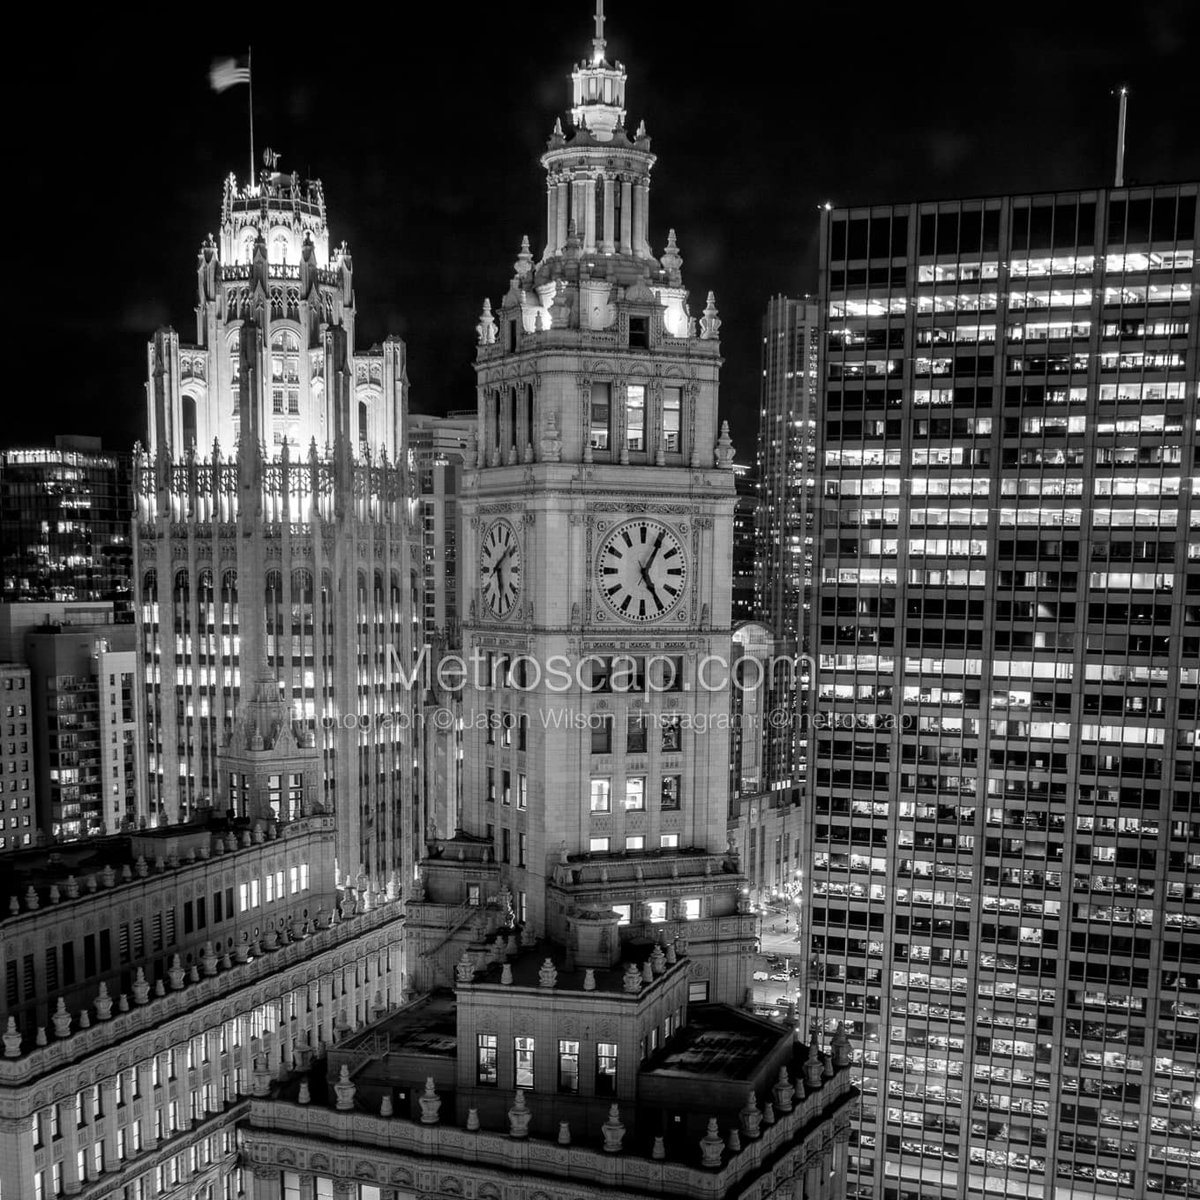 Chicago images Black & White: The Wrigley Building Clock Face at Night #chicago #windycity #chitown #lakeMichigan #navyPier #312 #BlackWhite | metroscap.com/vintage-chicag…